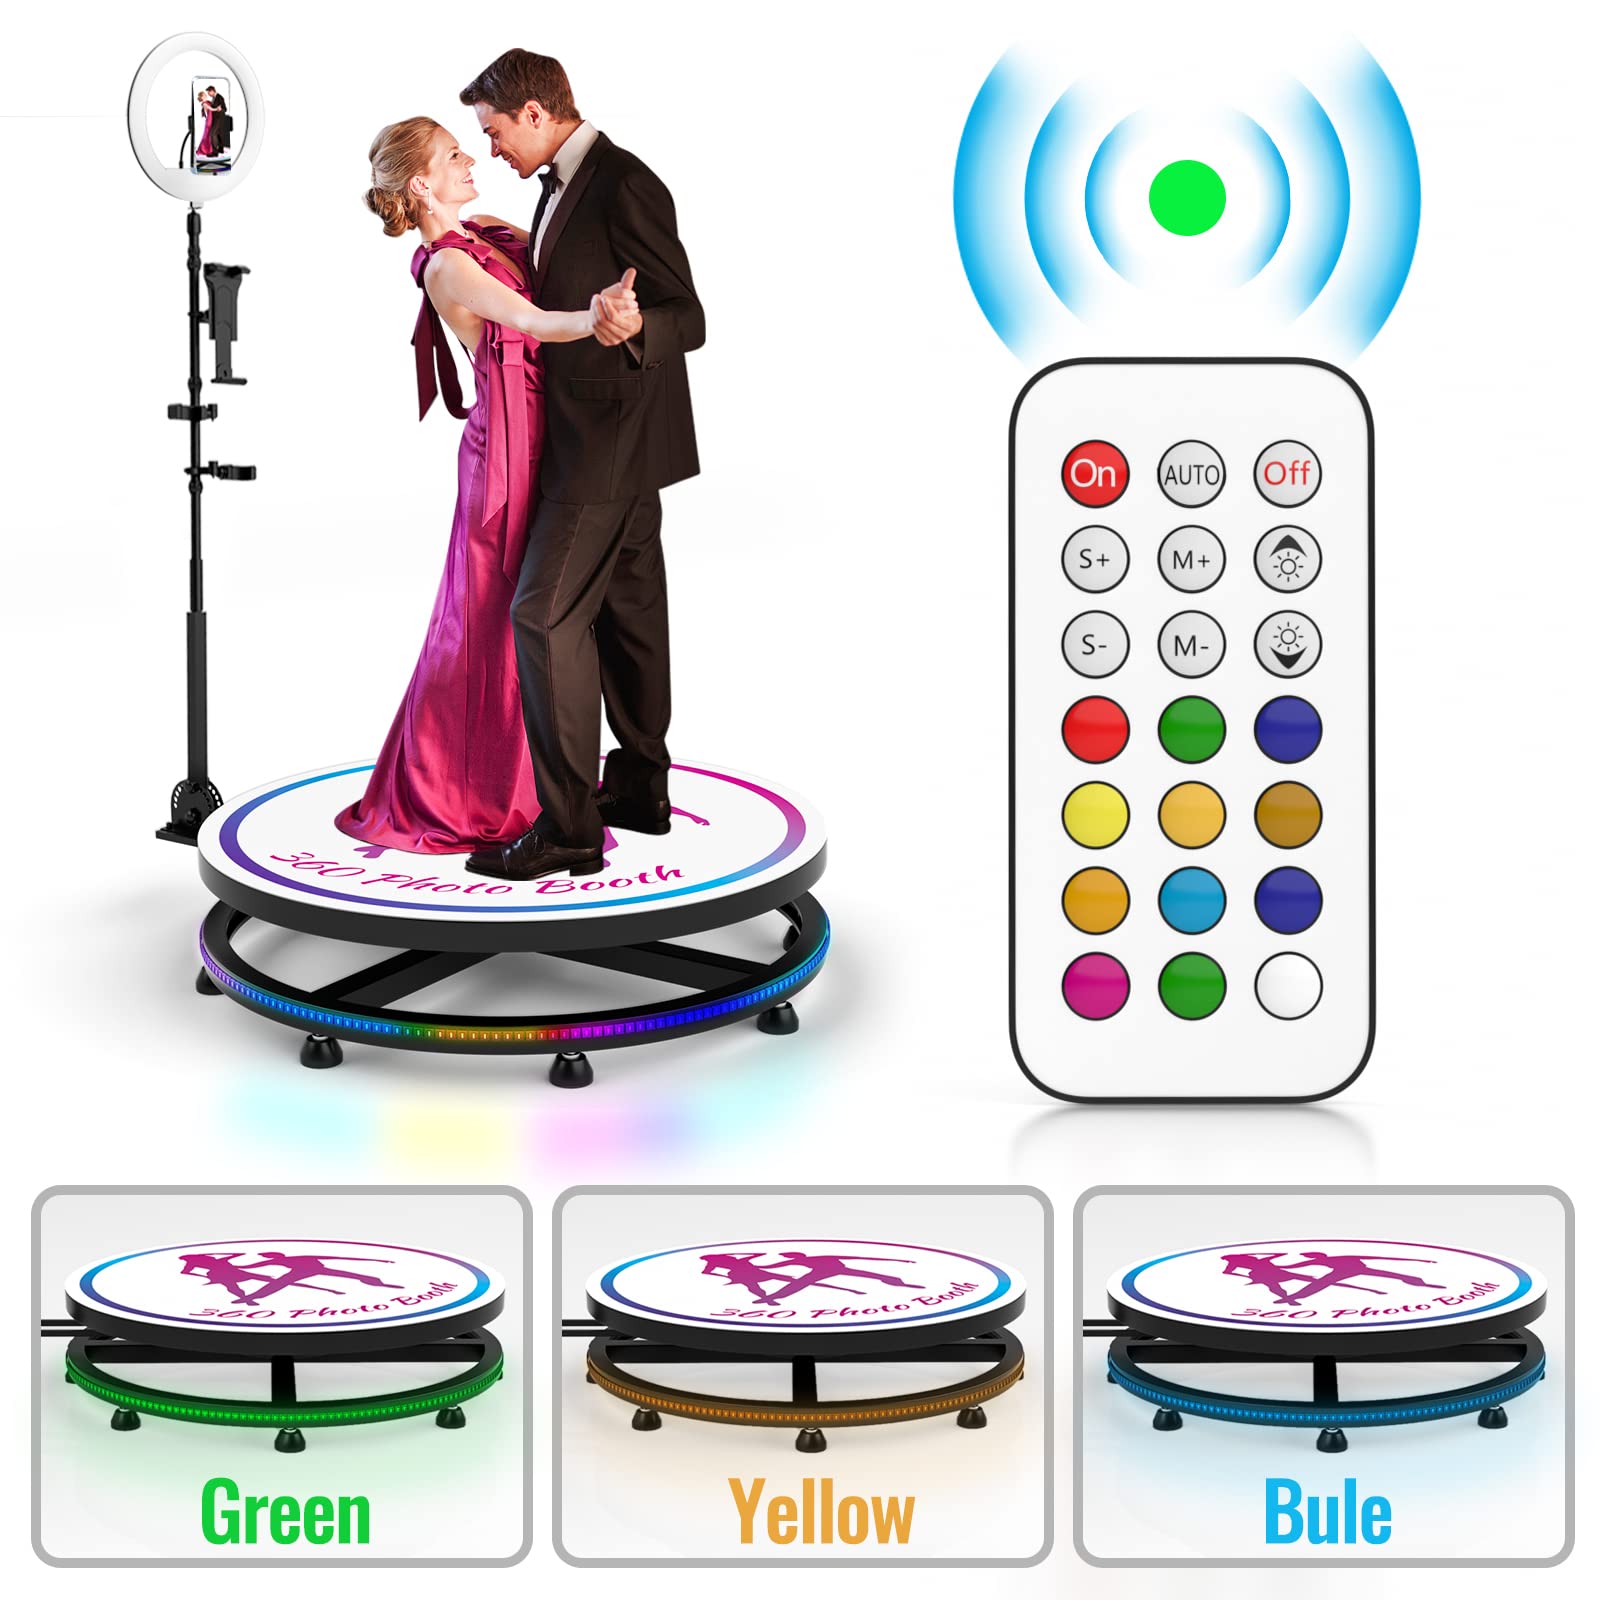 AIRUSAN 360 Photo Booth Machine for Parties Weddings Events with Ring Light, Selfie Holder Accessories, APP Remote Control, Flight Case, Free Logo Customization, 39.4